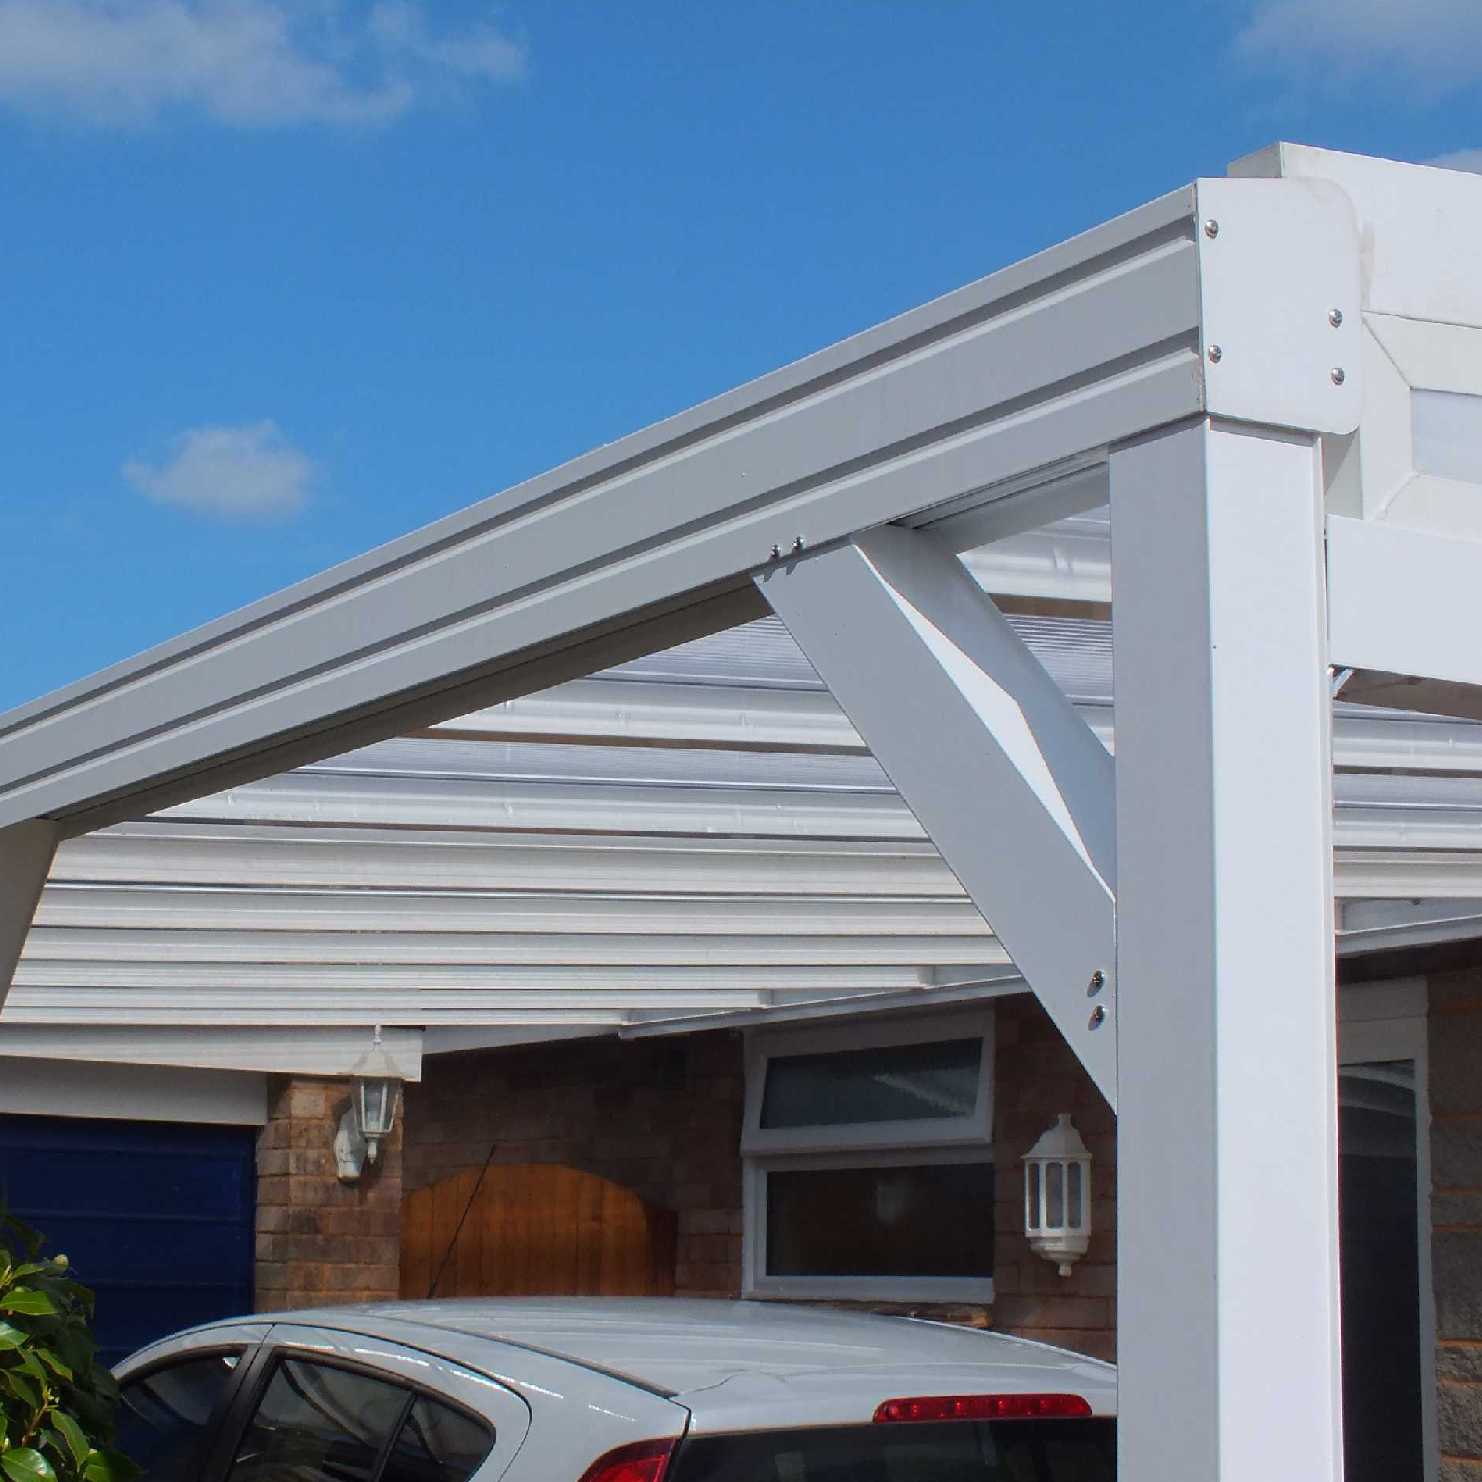 Buy Omega Smart Lean-To Canopy, White with 16mm Polycarbonate Glazing - 6.3m (W) x 3.5m (P), (4) Supporting Posts online today